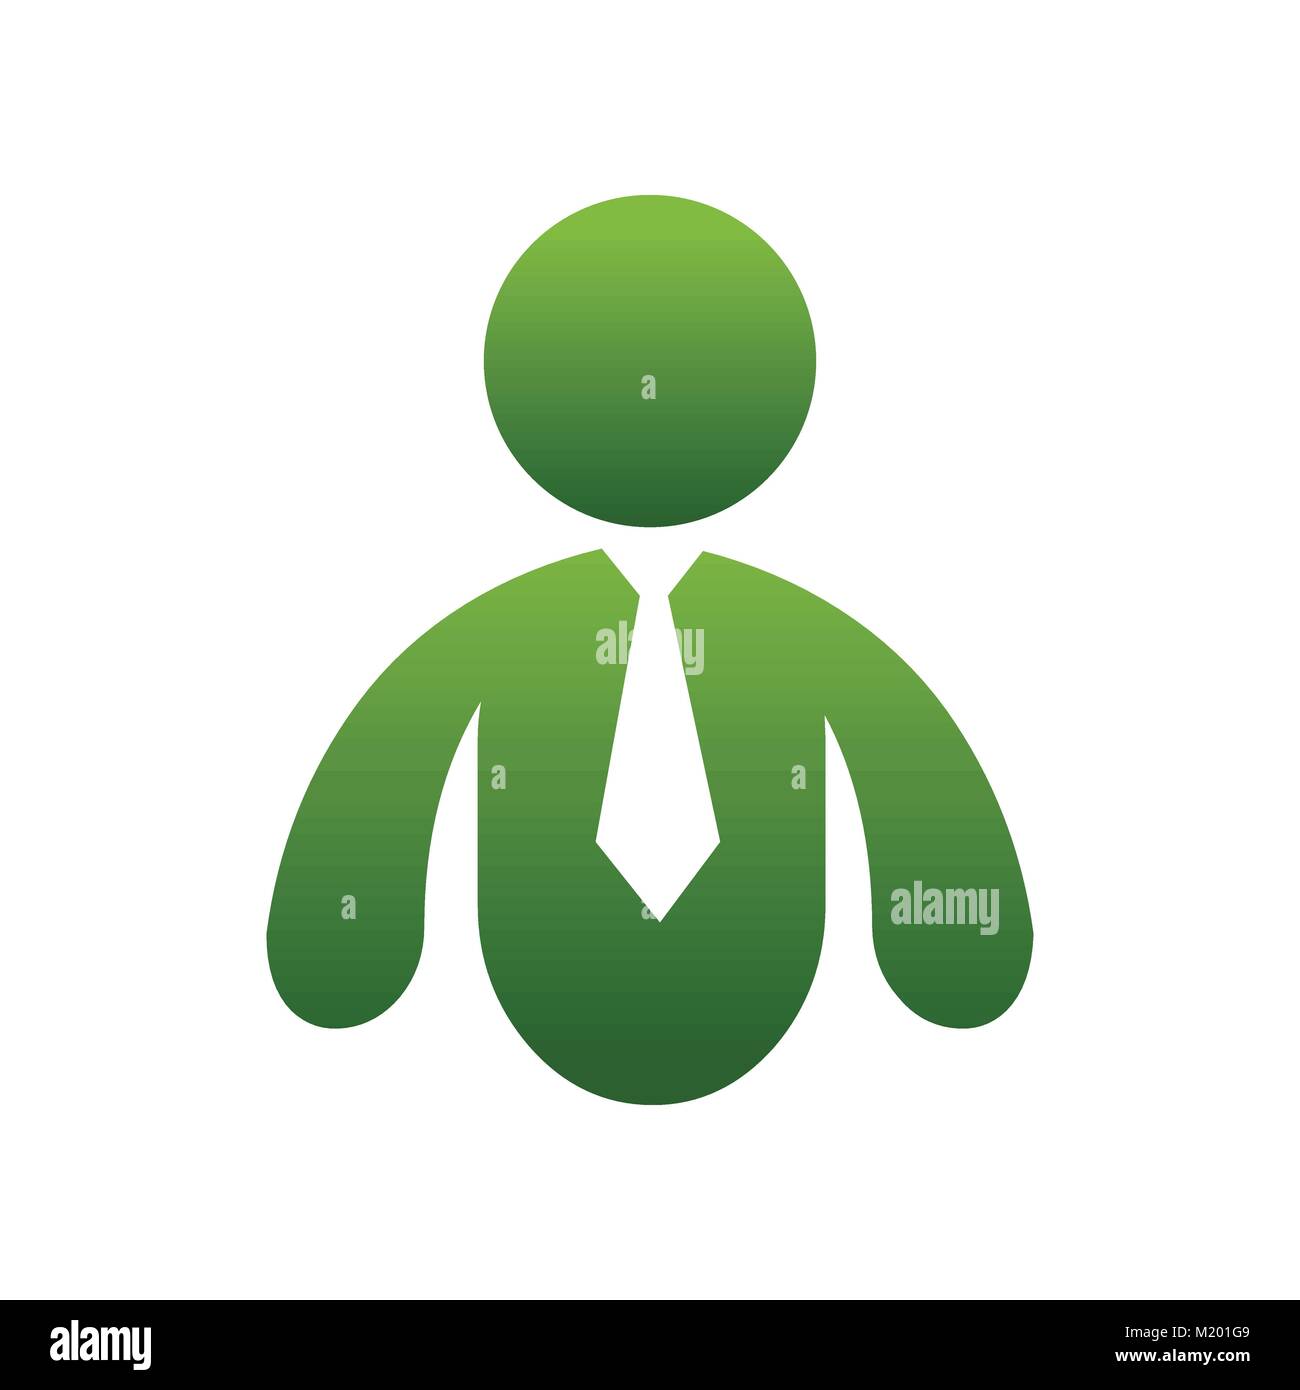 Abstract Professional Business Man Green Symbol Vector Graphic Logo Design Stock Vector